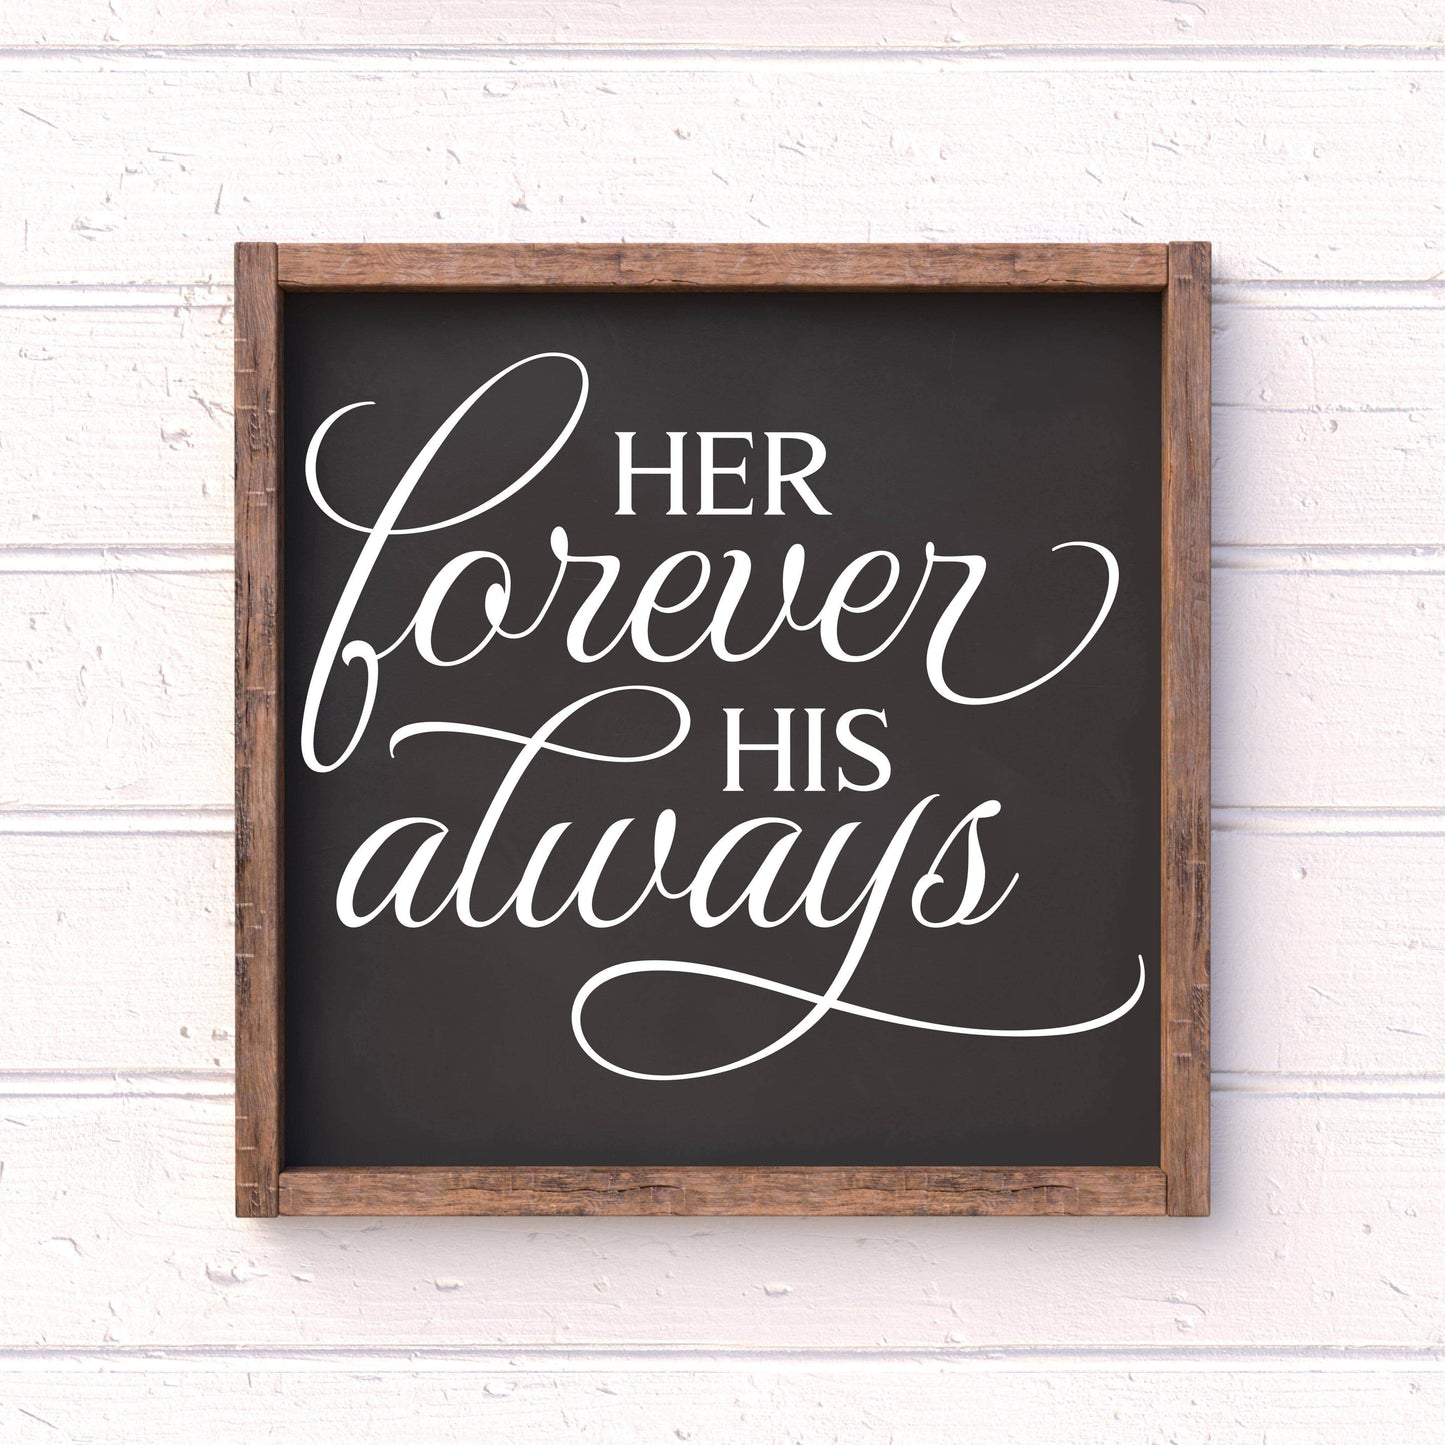 For Forever, His Always framed wood sign, love sign, couples gift sign, quote sign, home decor